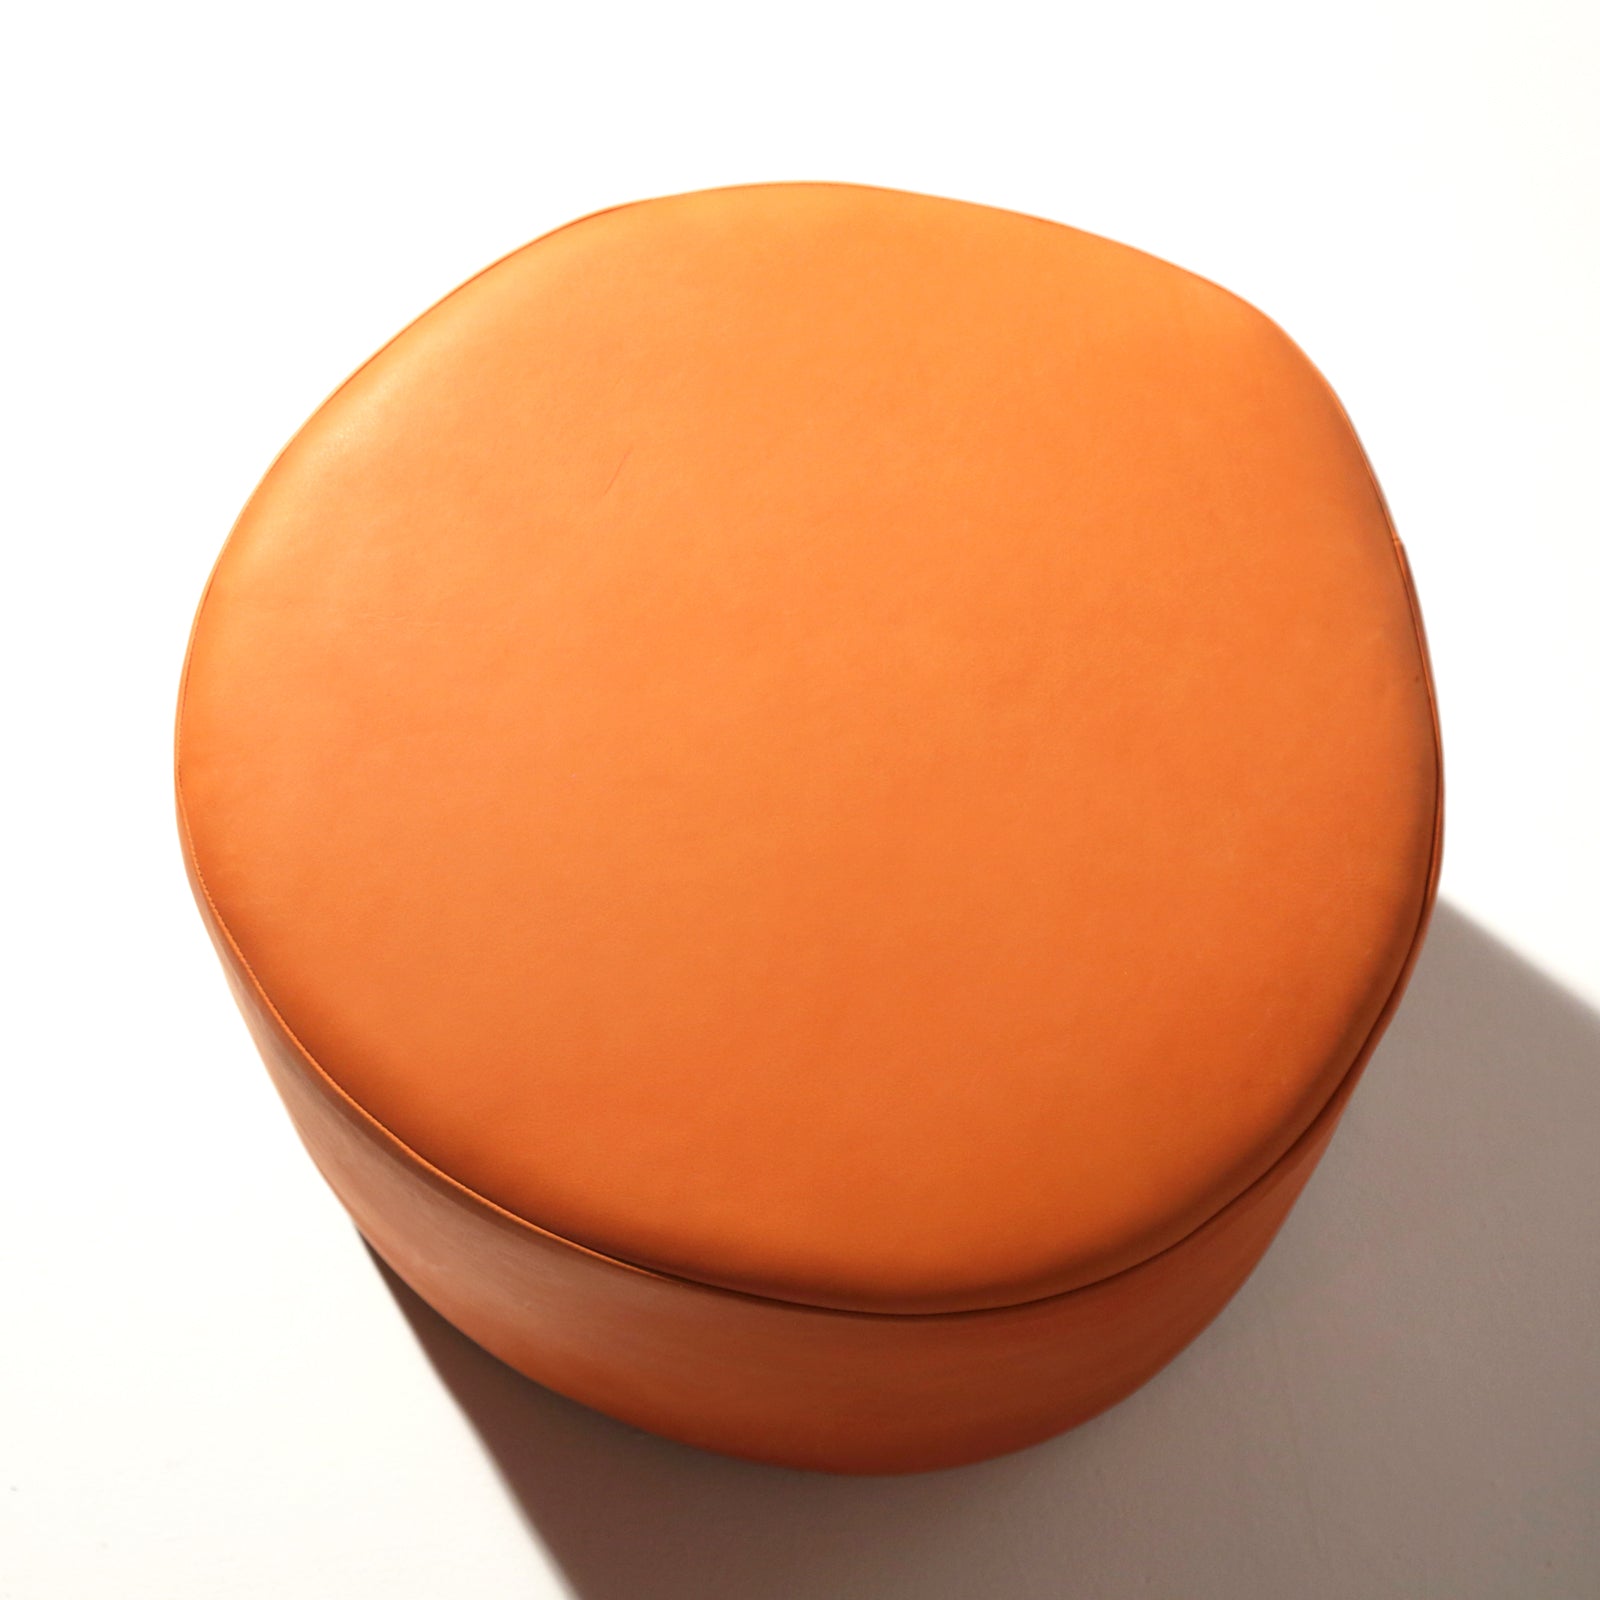 Round Faux Leather Collapsible Ottoman Pouf with Storage (No Filler), Orange